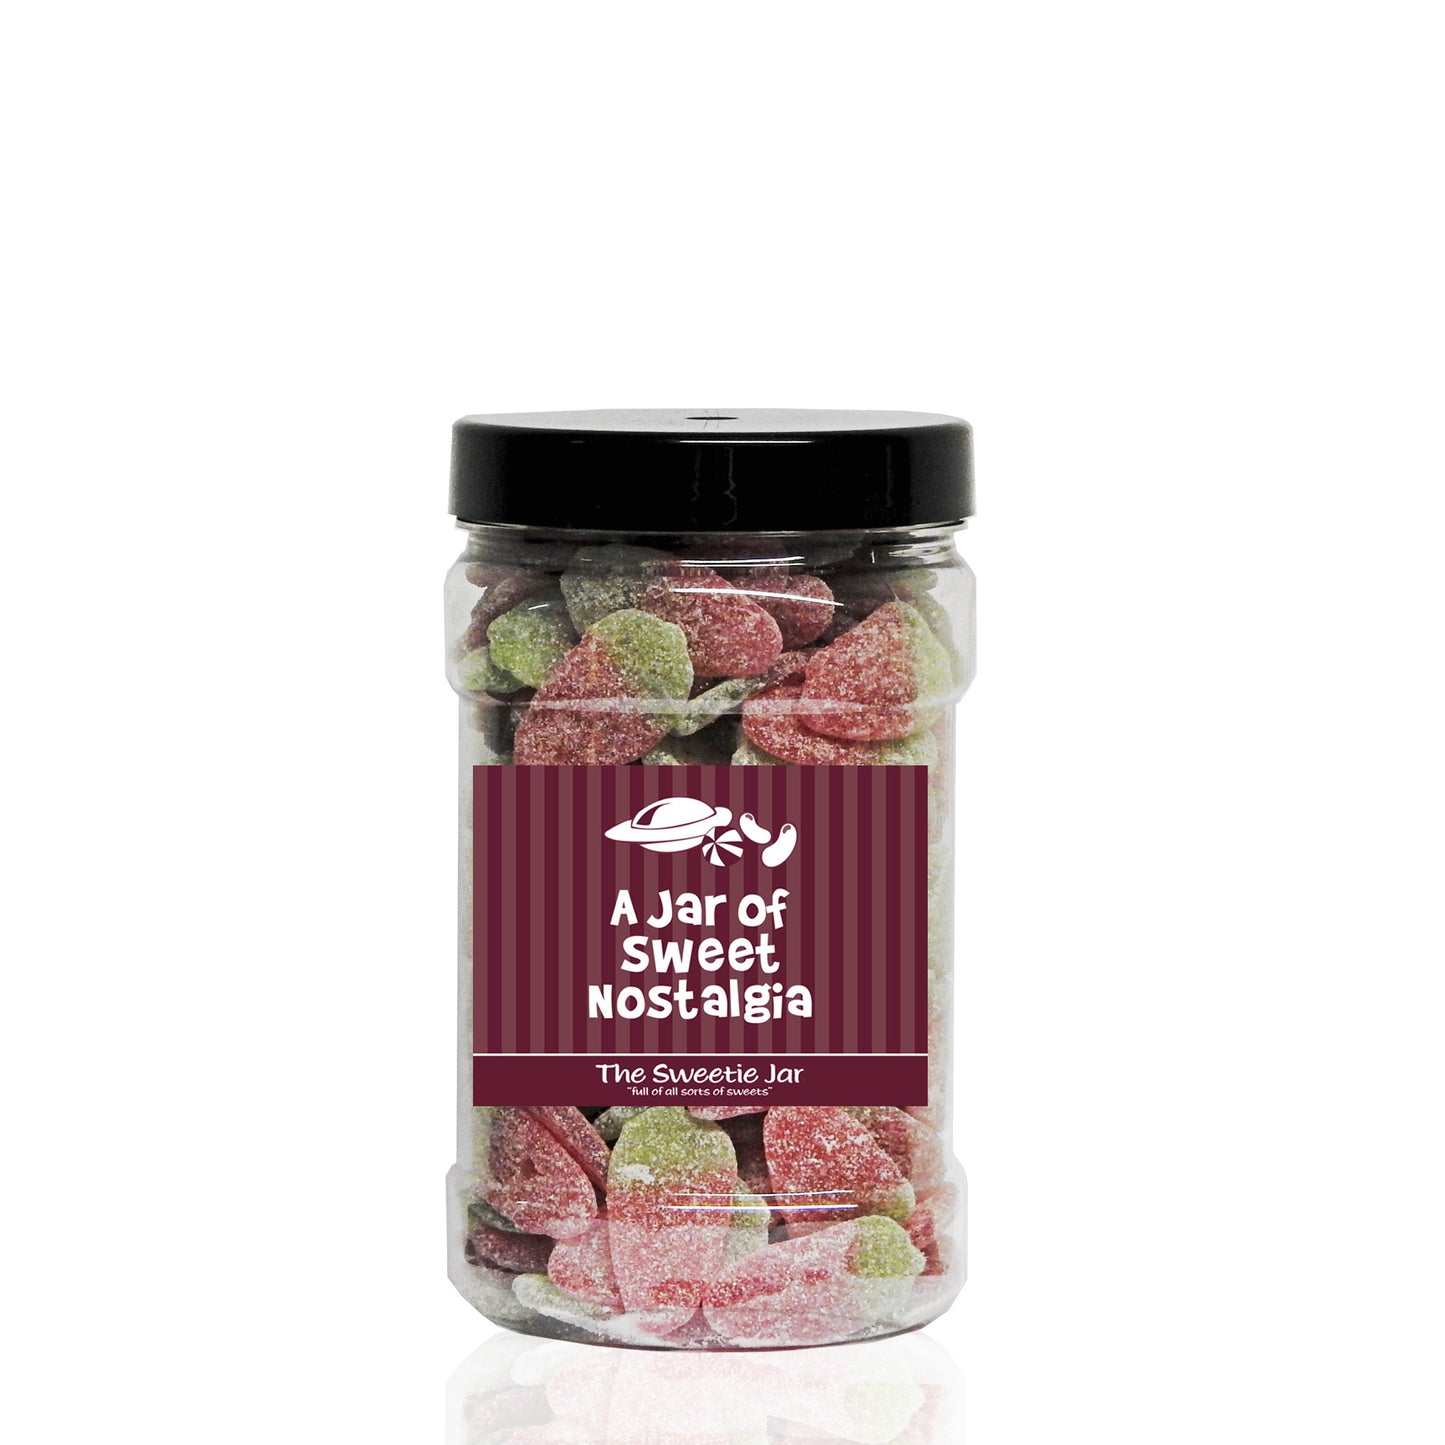 A Small Jar of Fizzy Strawberries - Sour Fruit Flavour Jelly Sweets at The Sweetie Jar